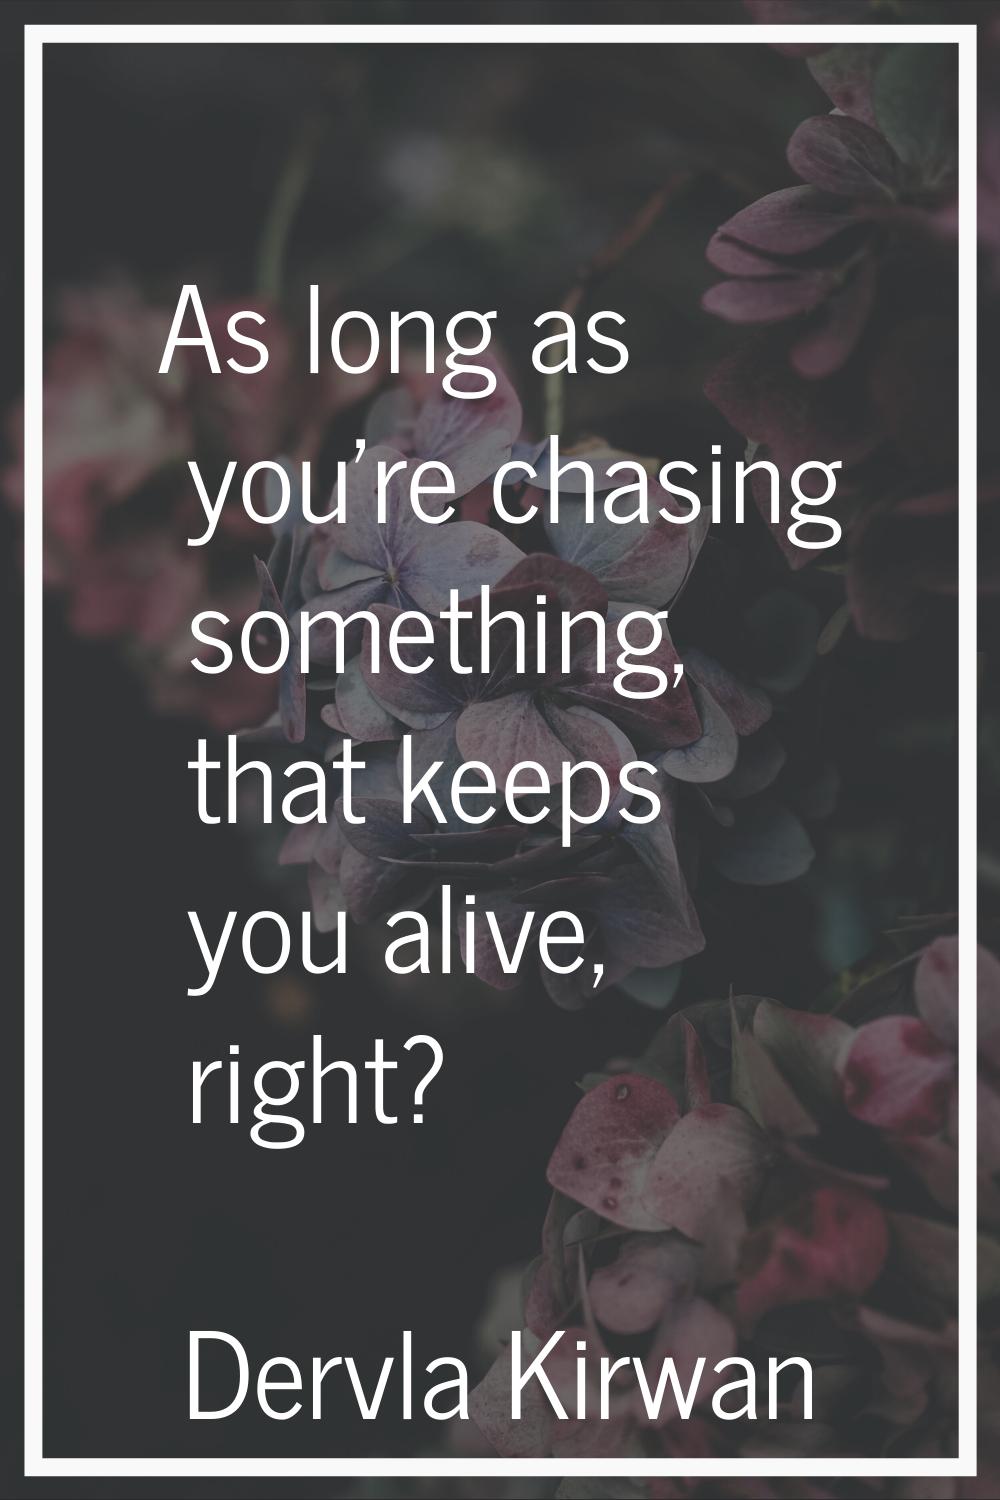 As long as you're chasing something, that keeps you alive, right?